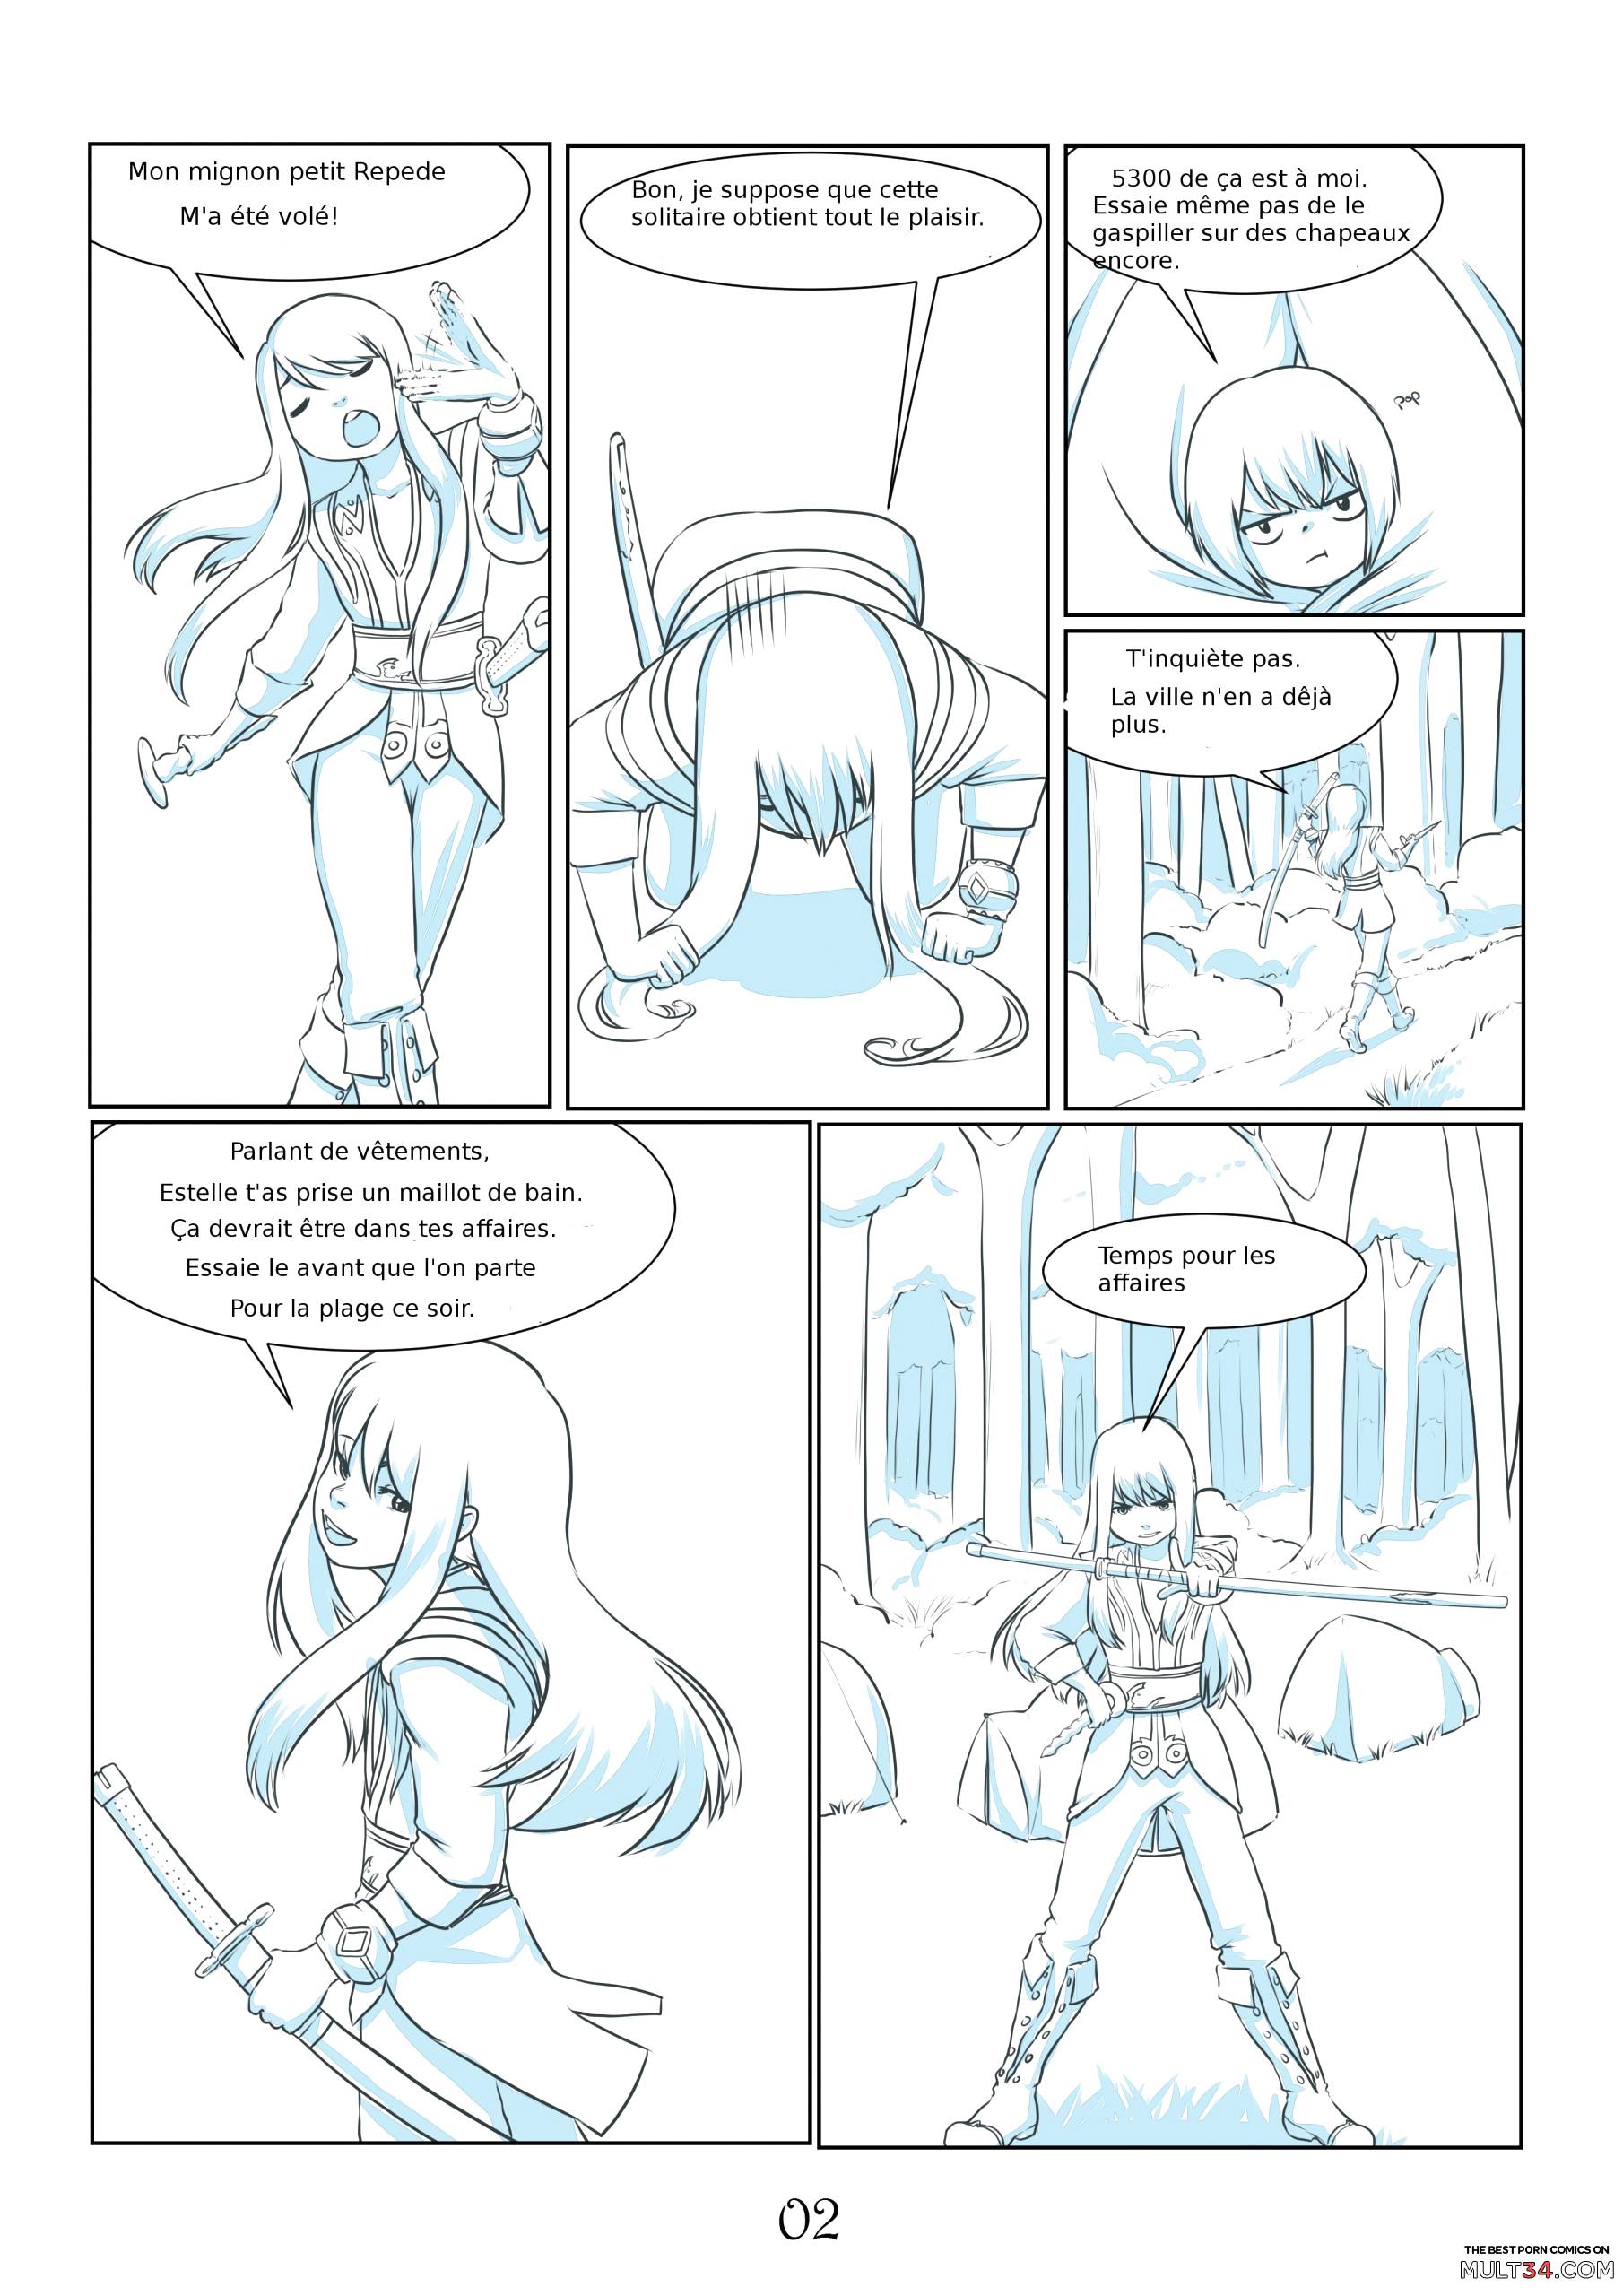 Tales of Rita and Repede - Episode 2 page 3